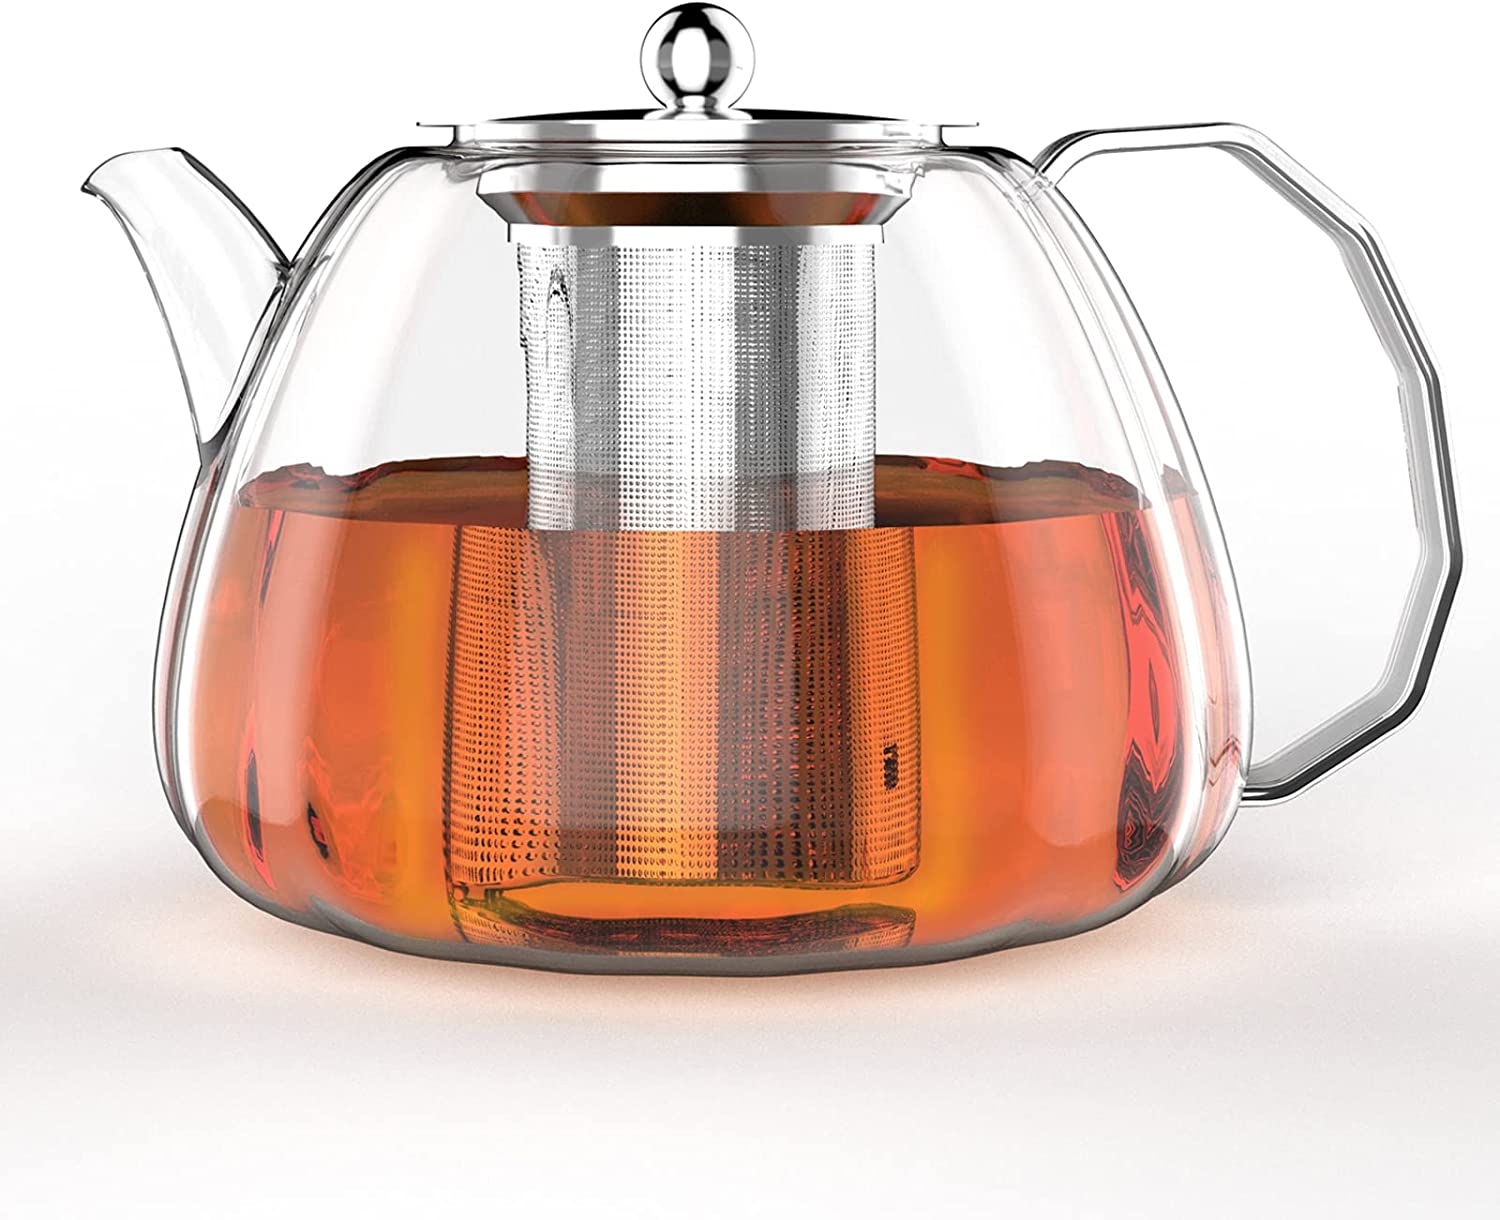 Luvan 1300 ml Glass Teapot with Removable Tea Infuser, Stovetop Safe Glass Teapots, Glass Teapots with Stainless Steel Strainer for Flower Tea and Loose Tea, Flower Tea, Tea Bags, Gifts for Tea Lovers